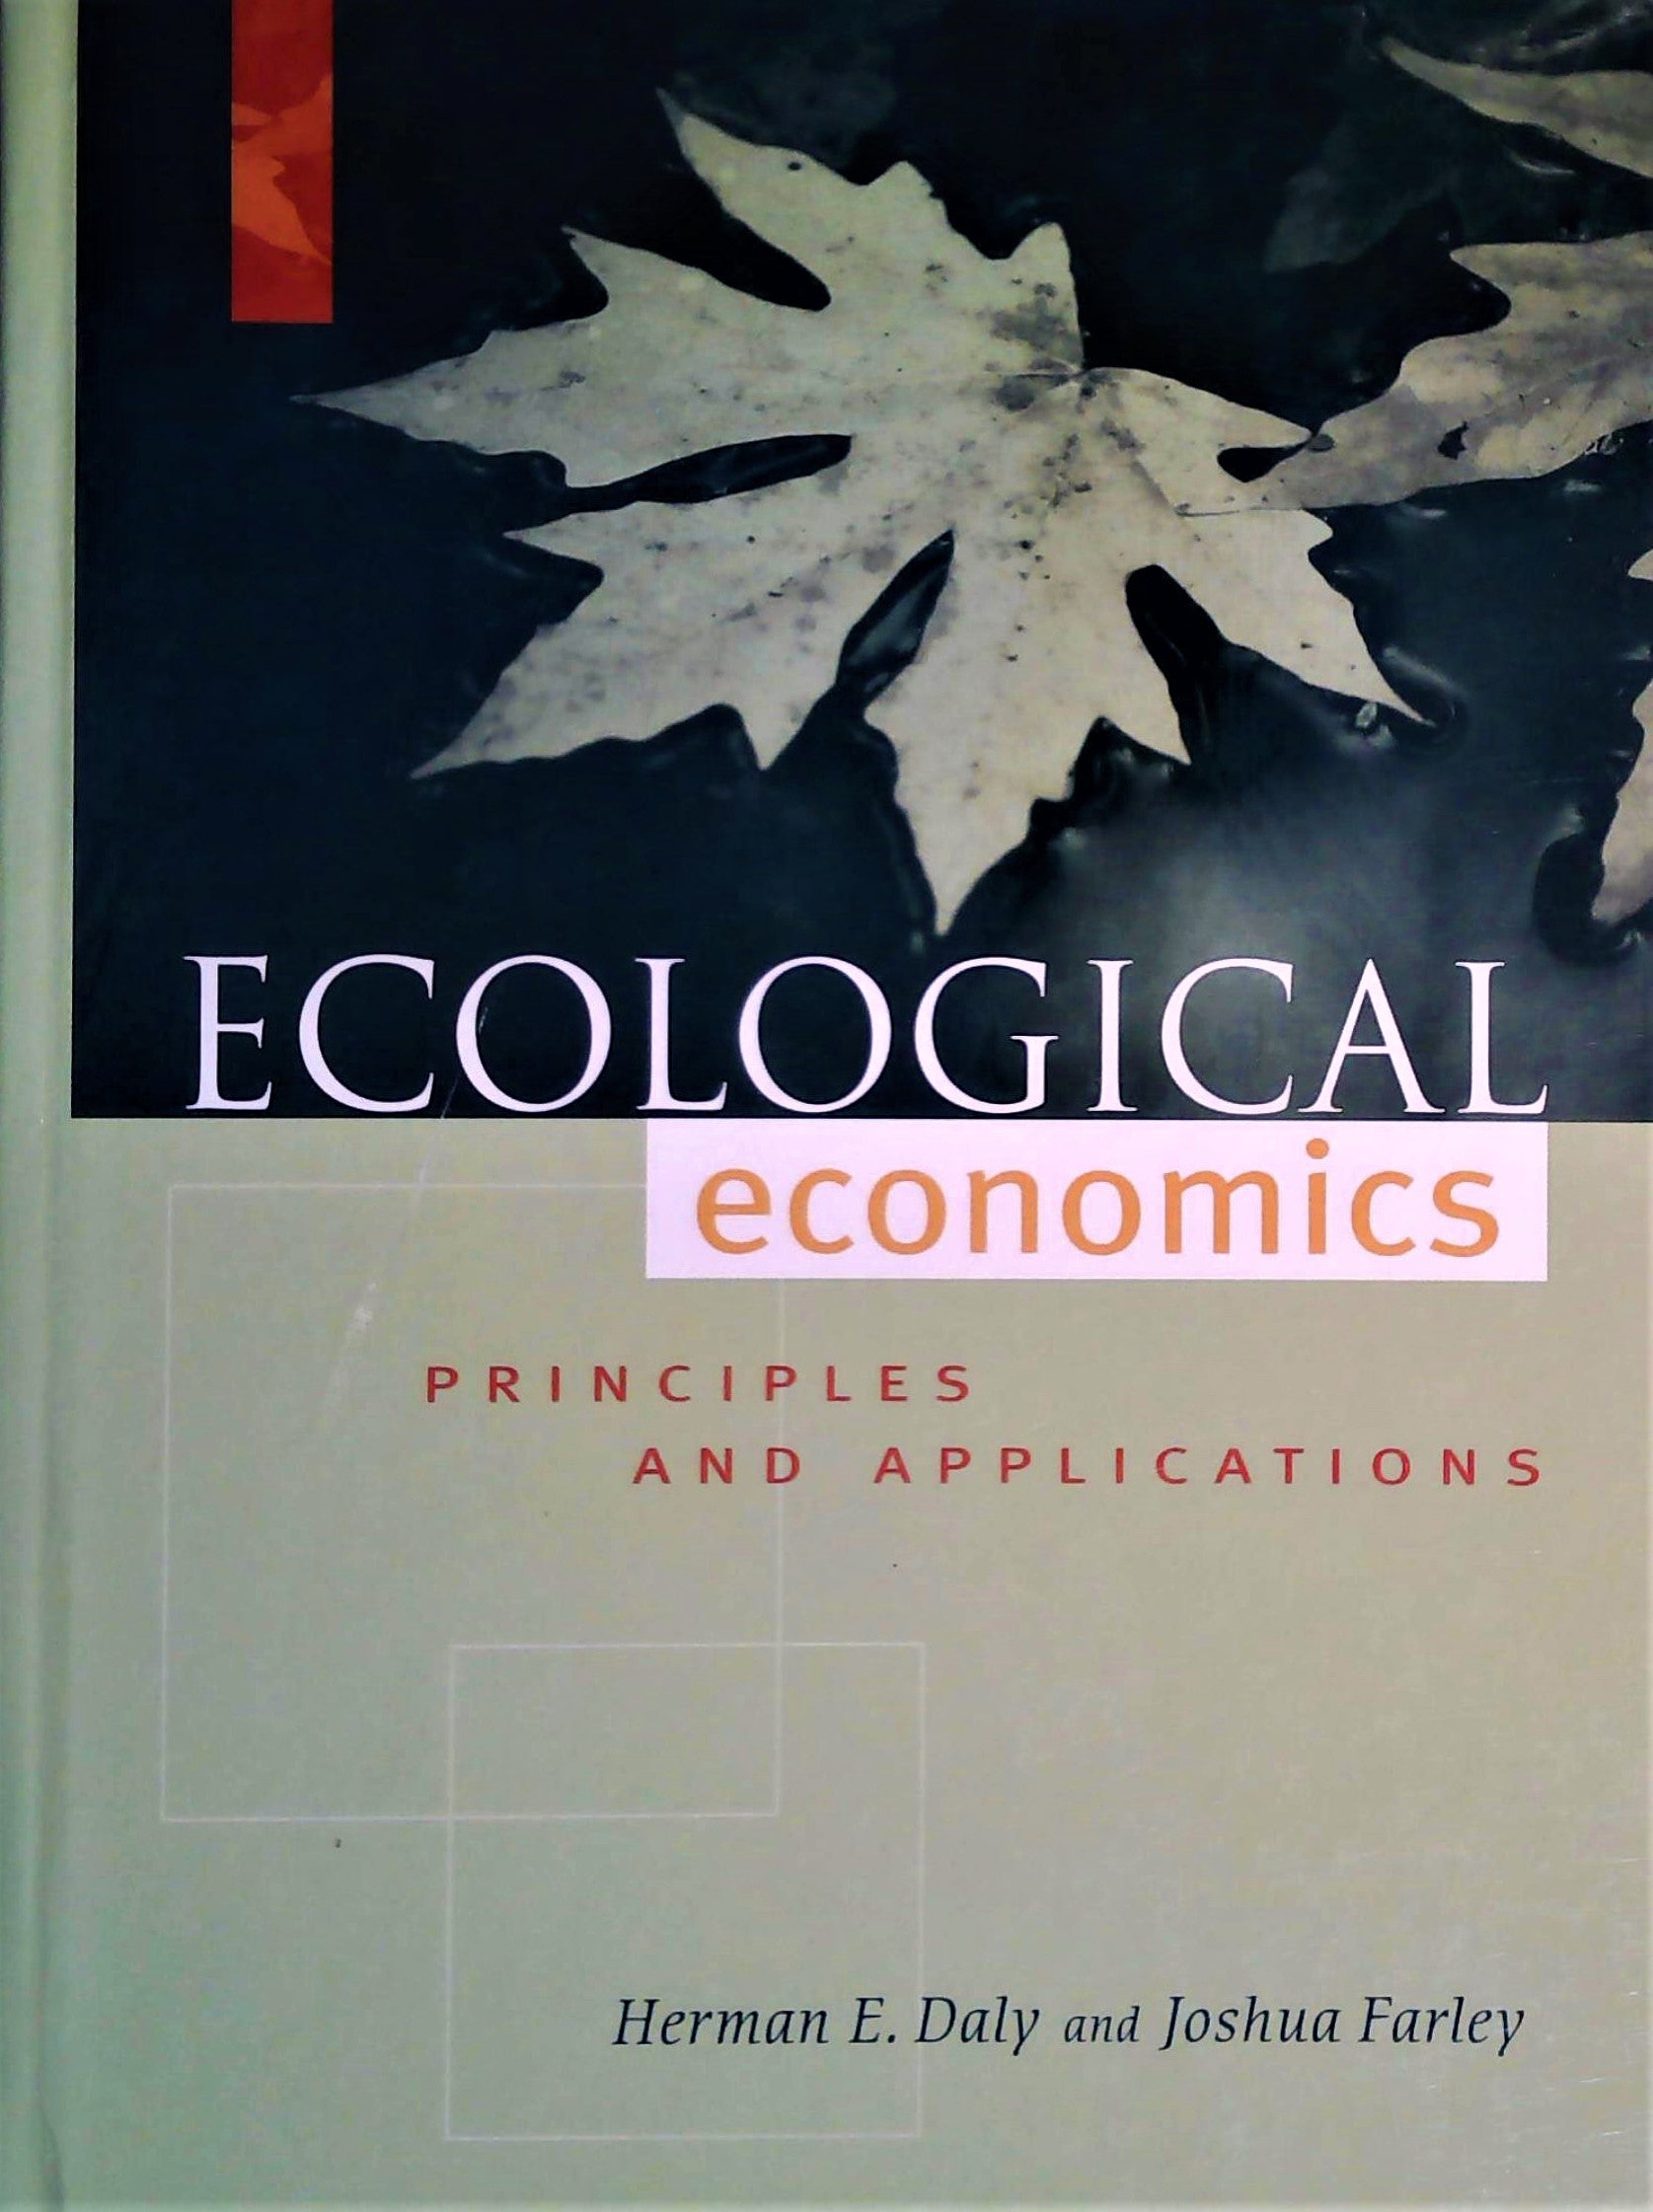 Livre ISBN 1559633123 Ecological Economics: Principles And Applications (Herman E. Daly)